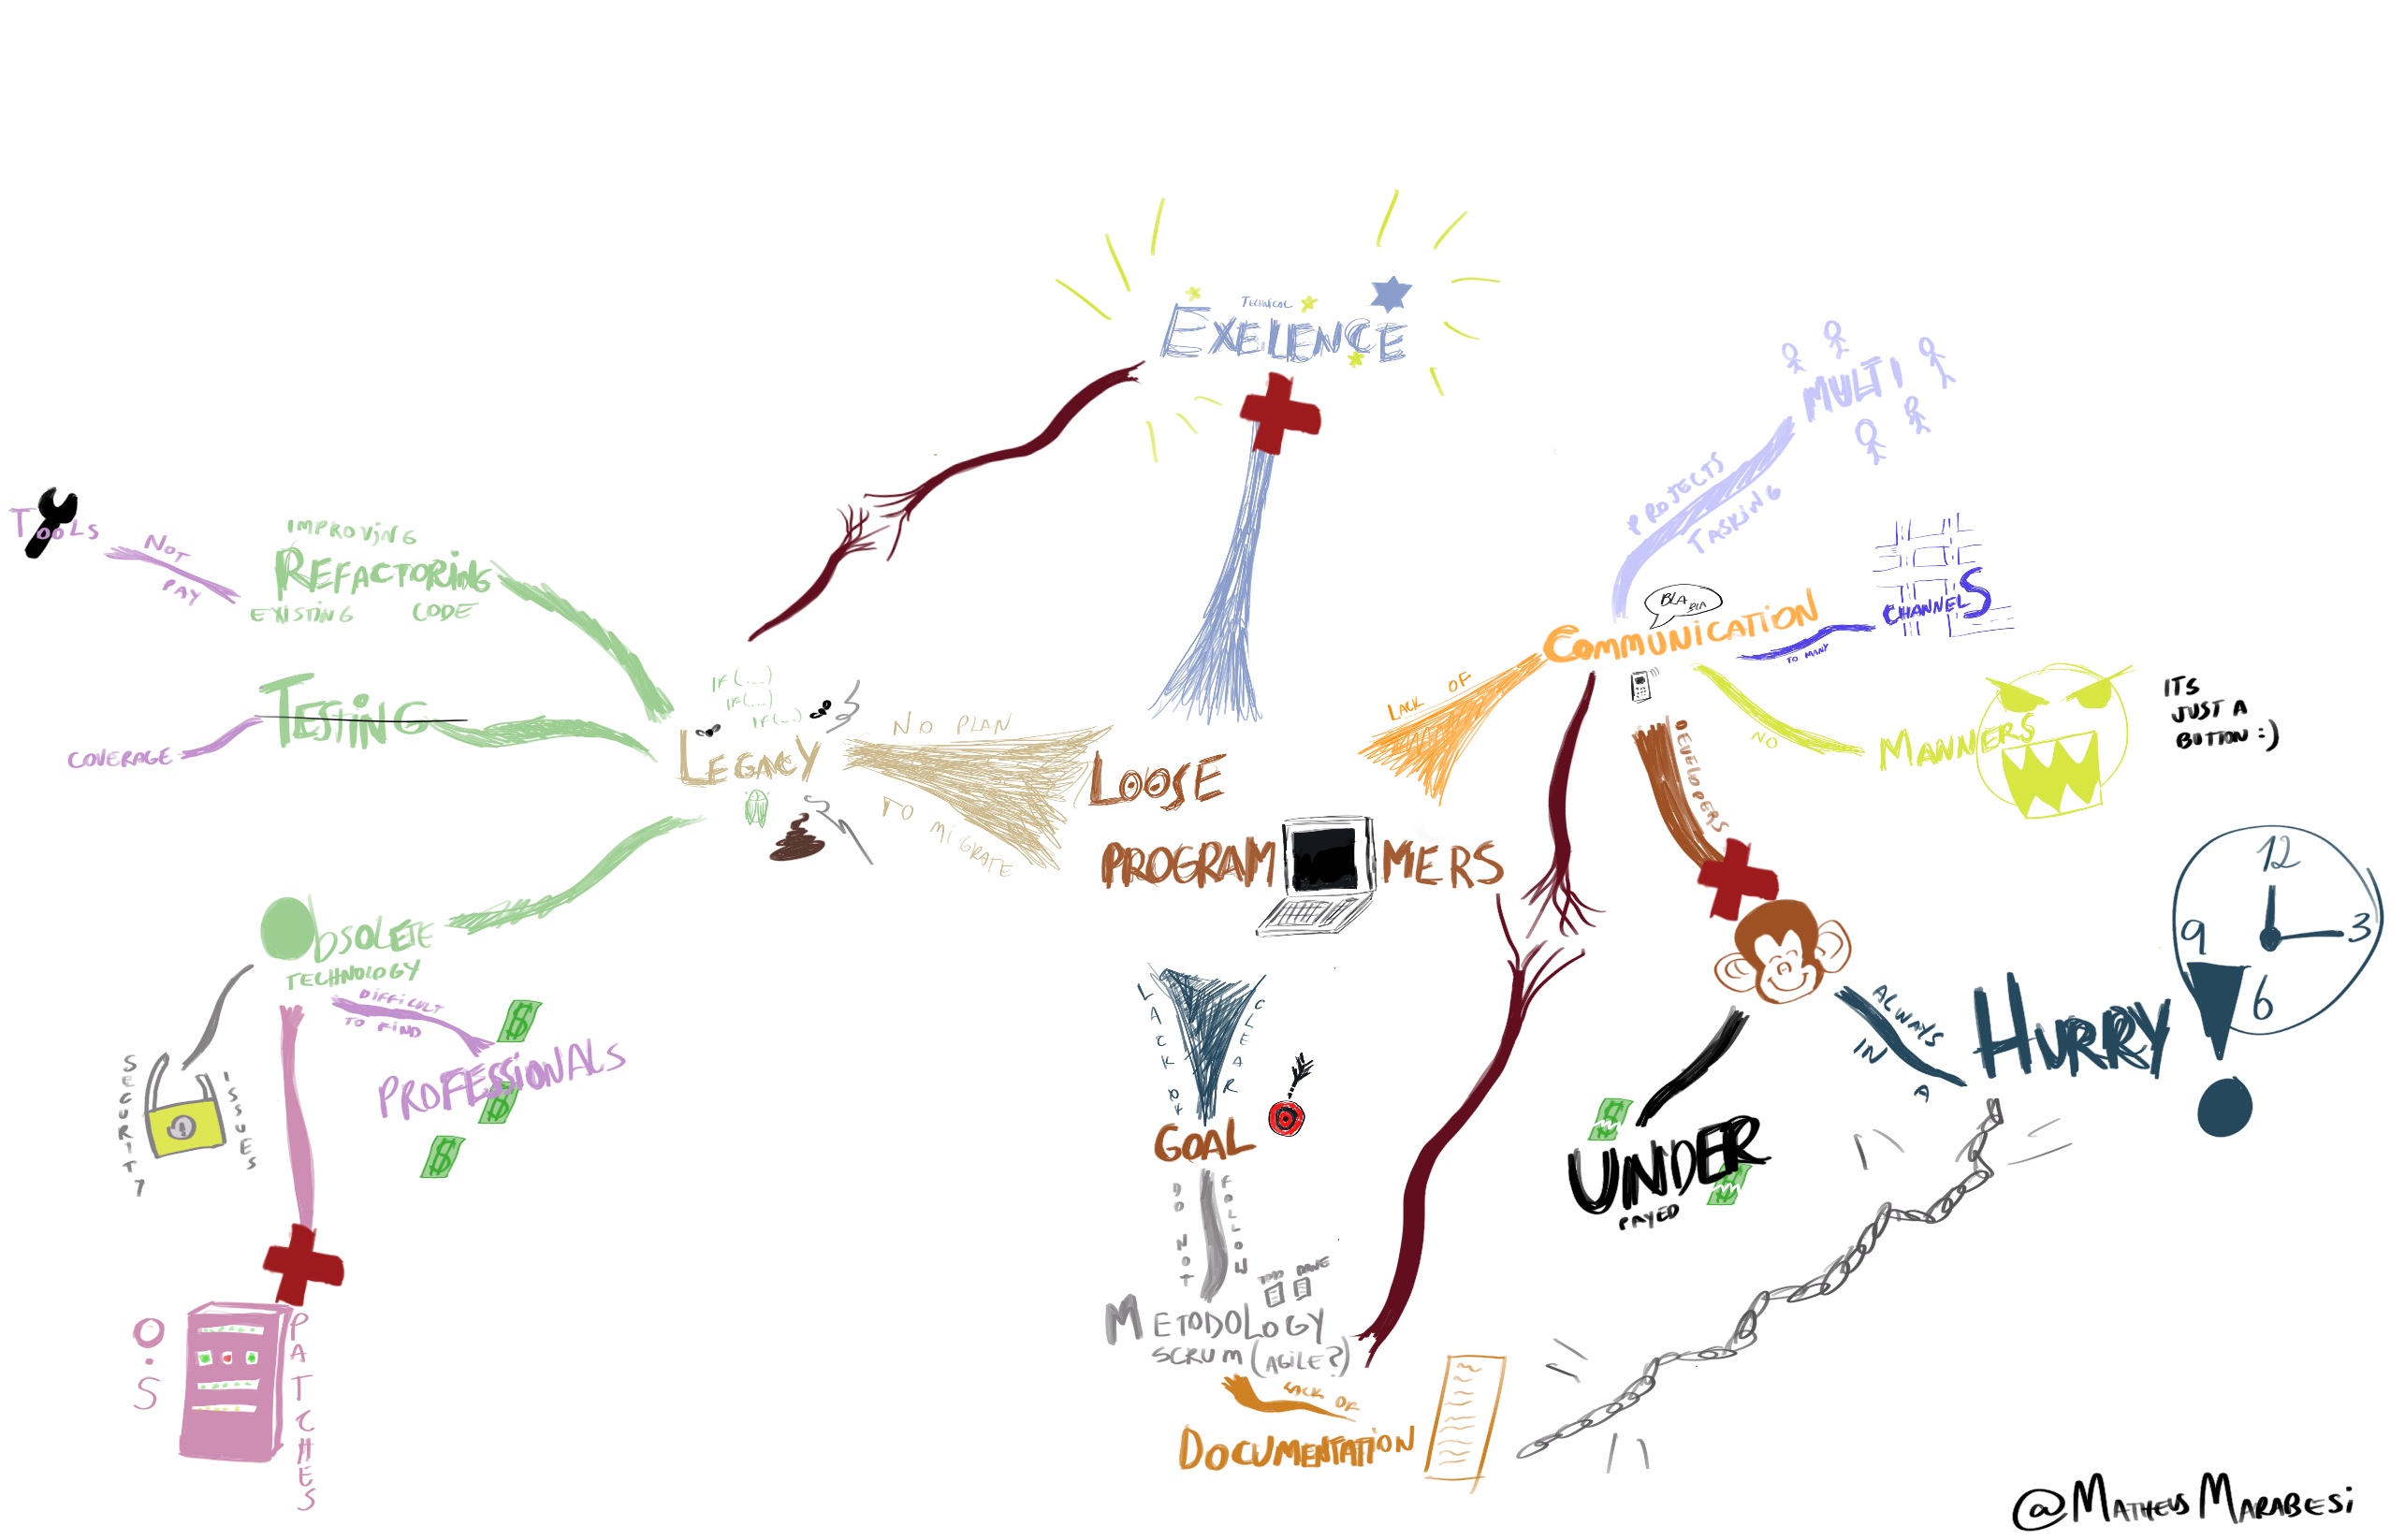 Mind mapping - how to loose your developers